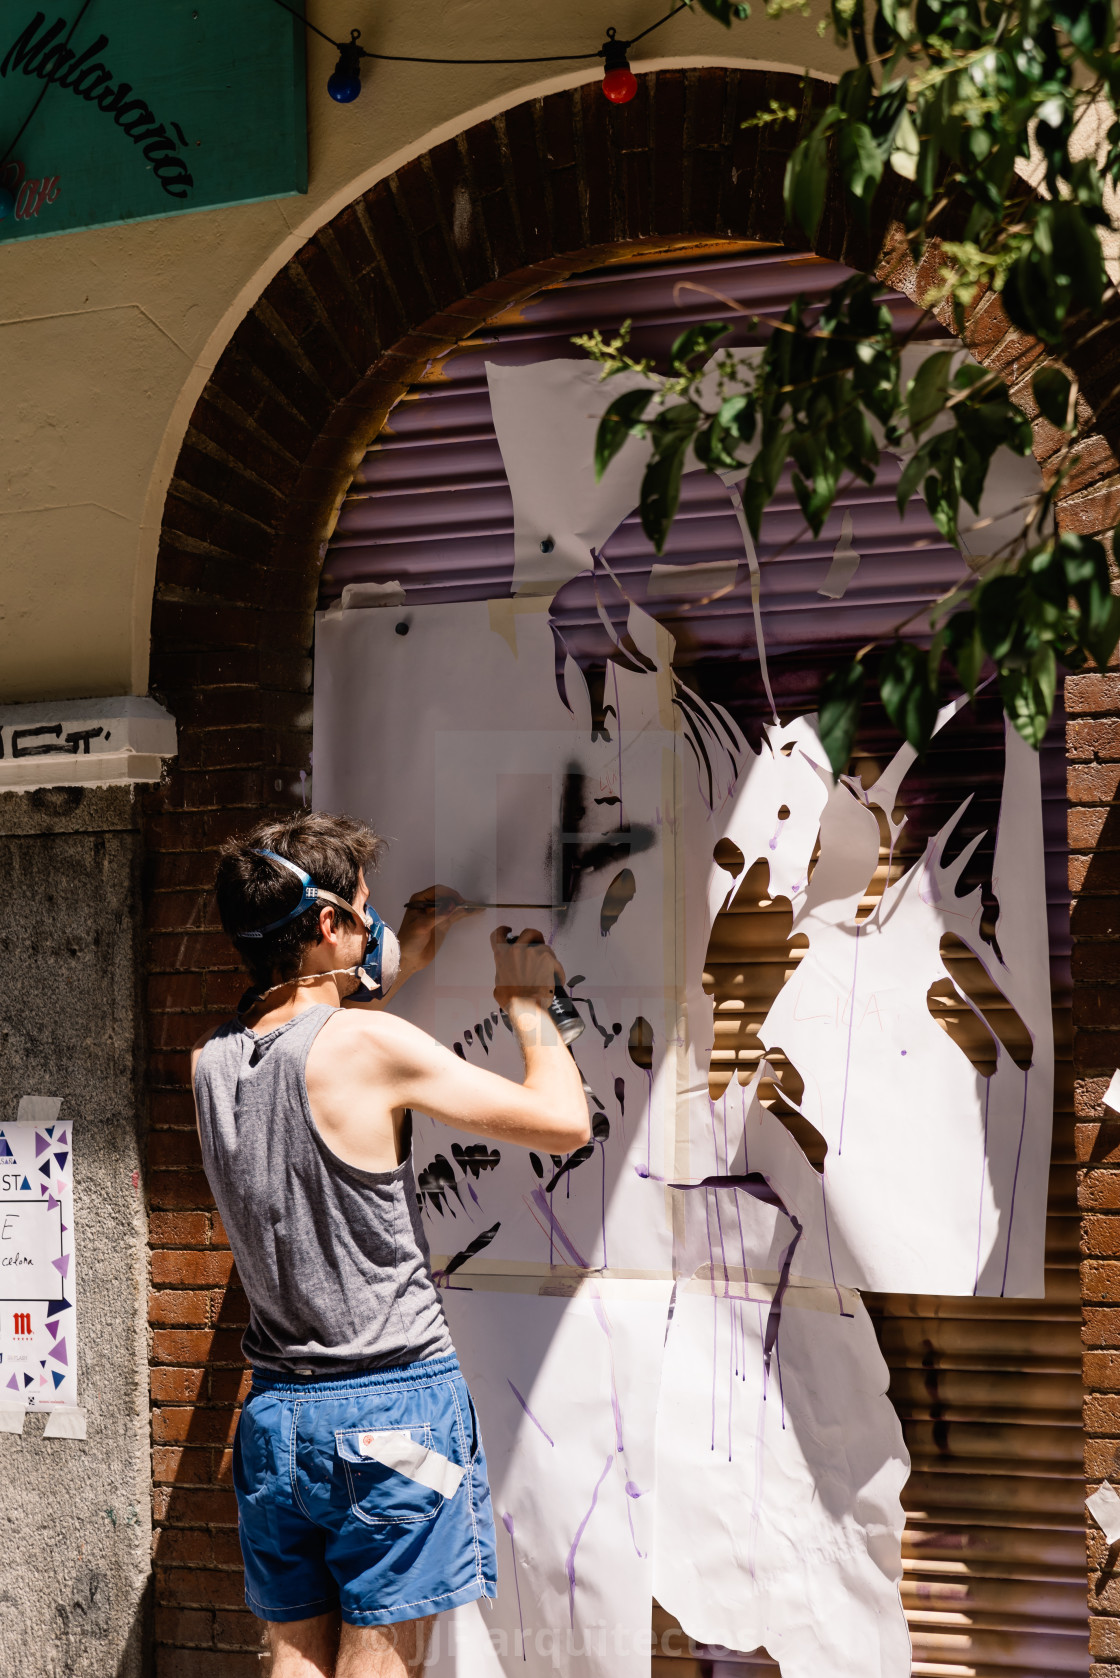 "Artist painting storefront in Malasana district in Madrid" stock image